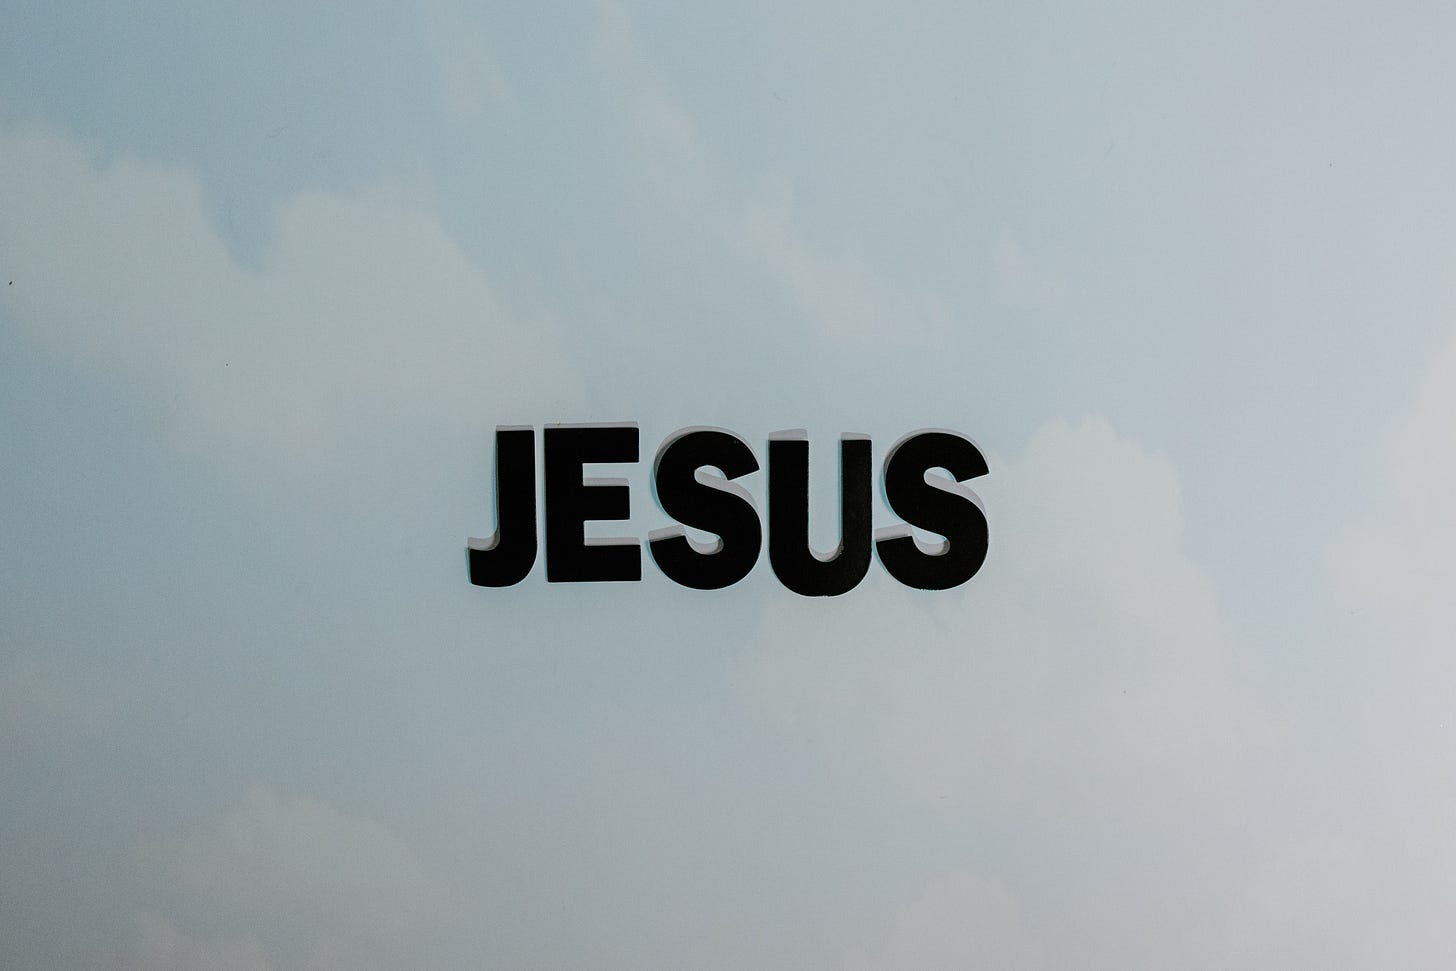 The word "Jesus" on a cloud background.